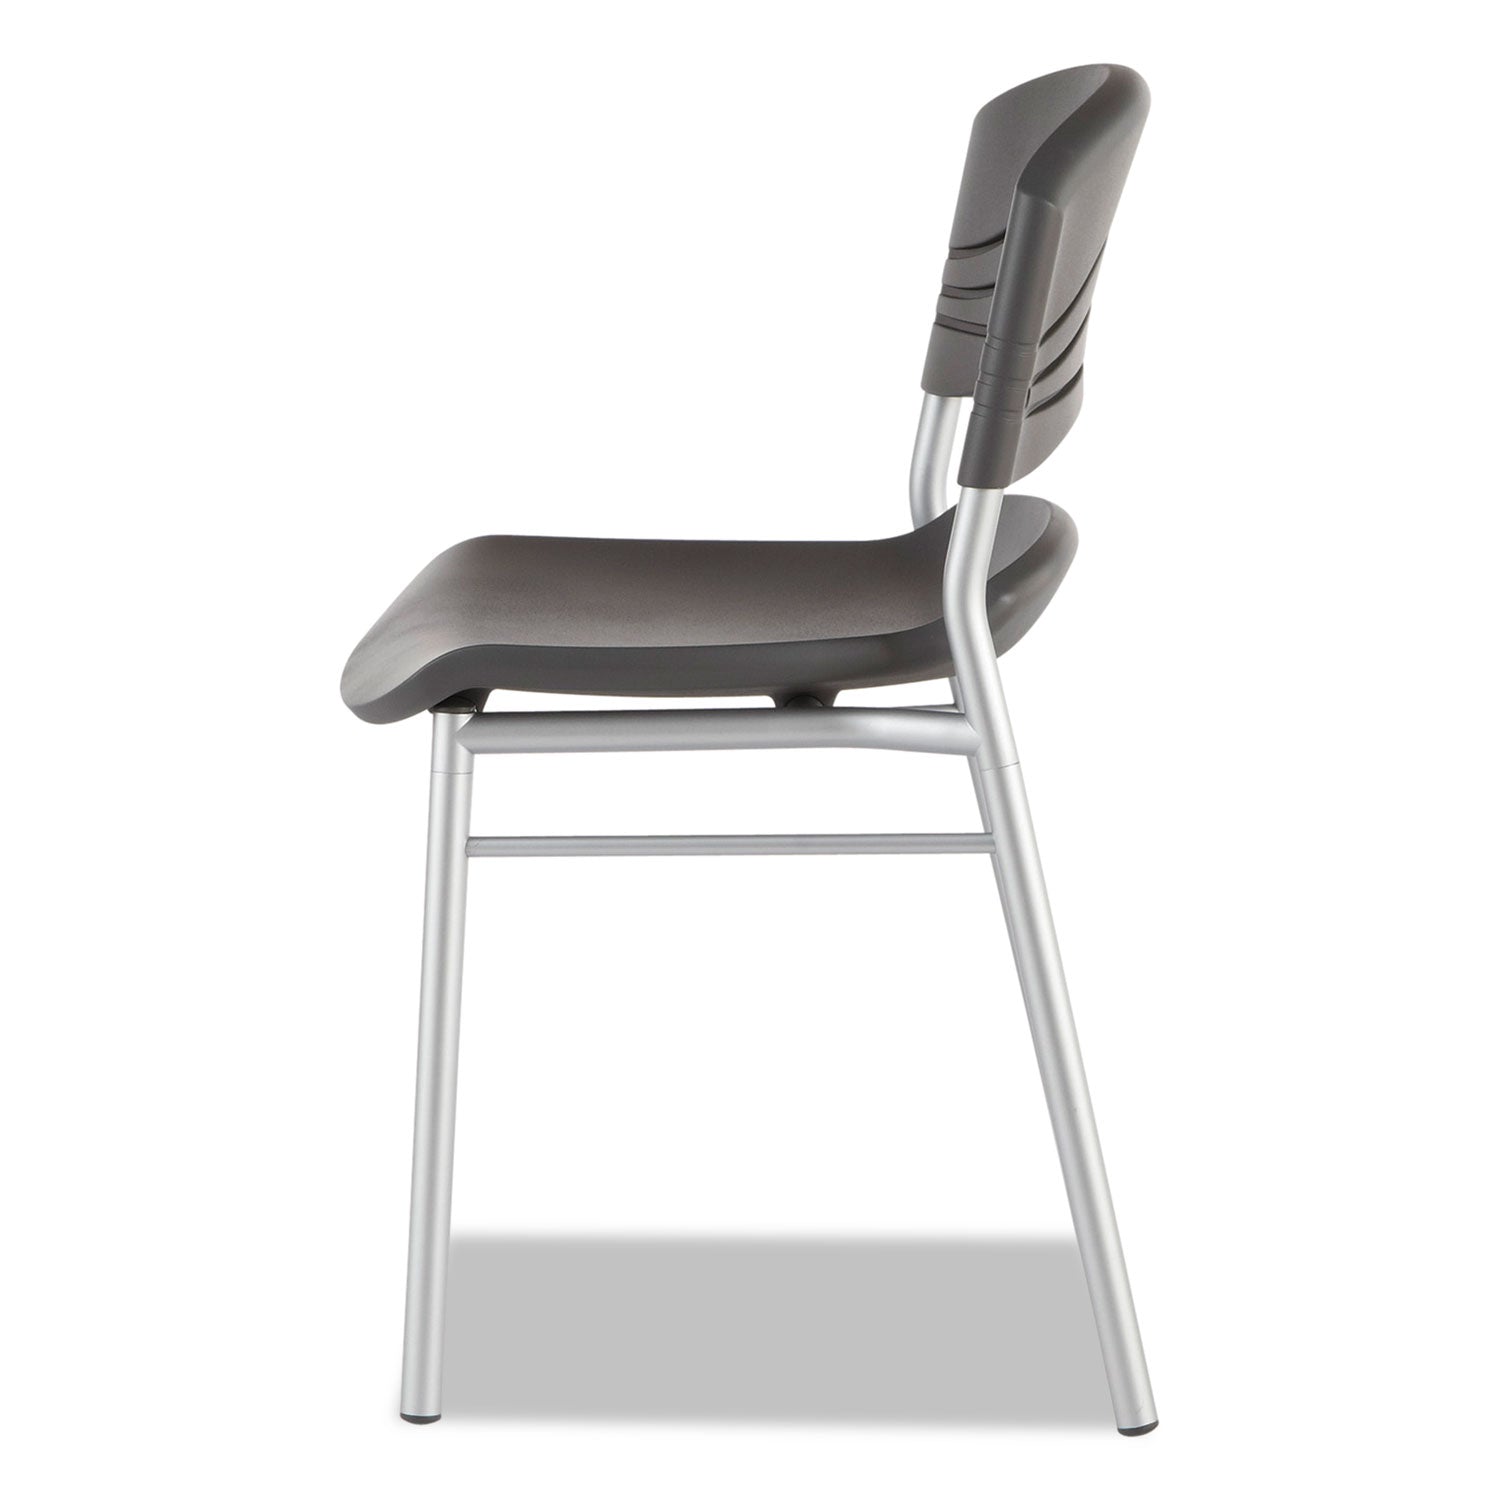 CafeWorks Chair, Supports Up to 225 lb, 18" Seat Height, Graphite Seat/Back, Silver Base, 2/Carton - 